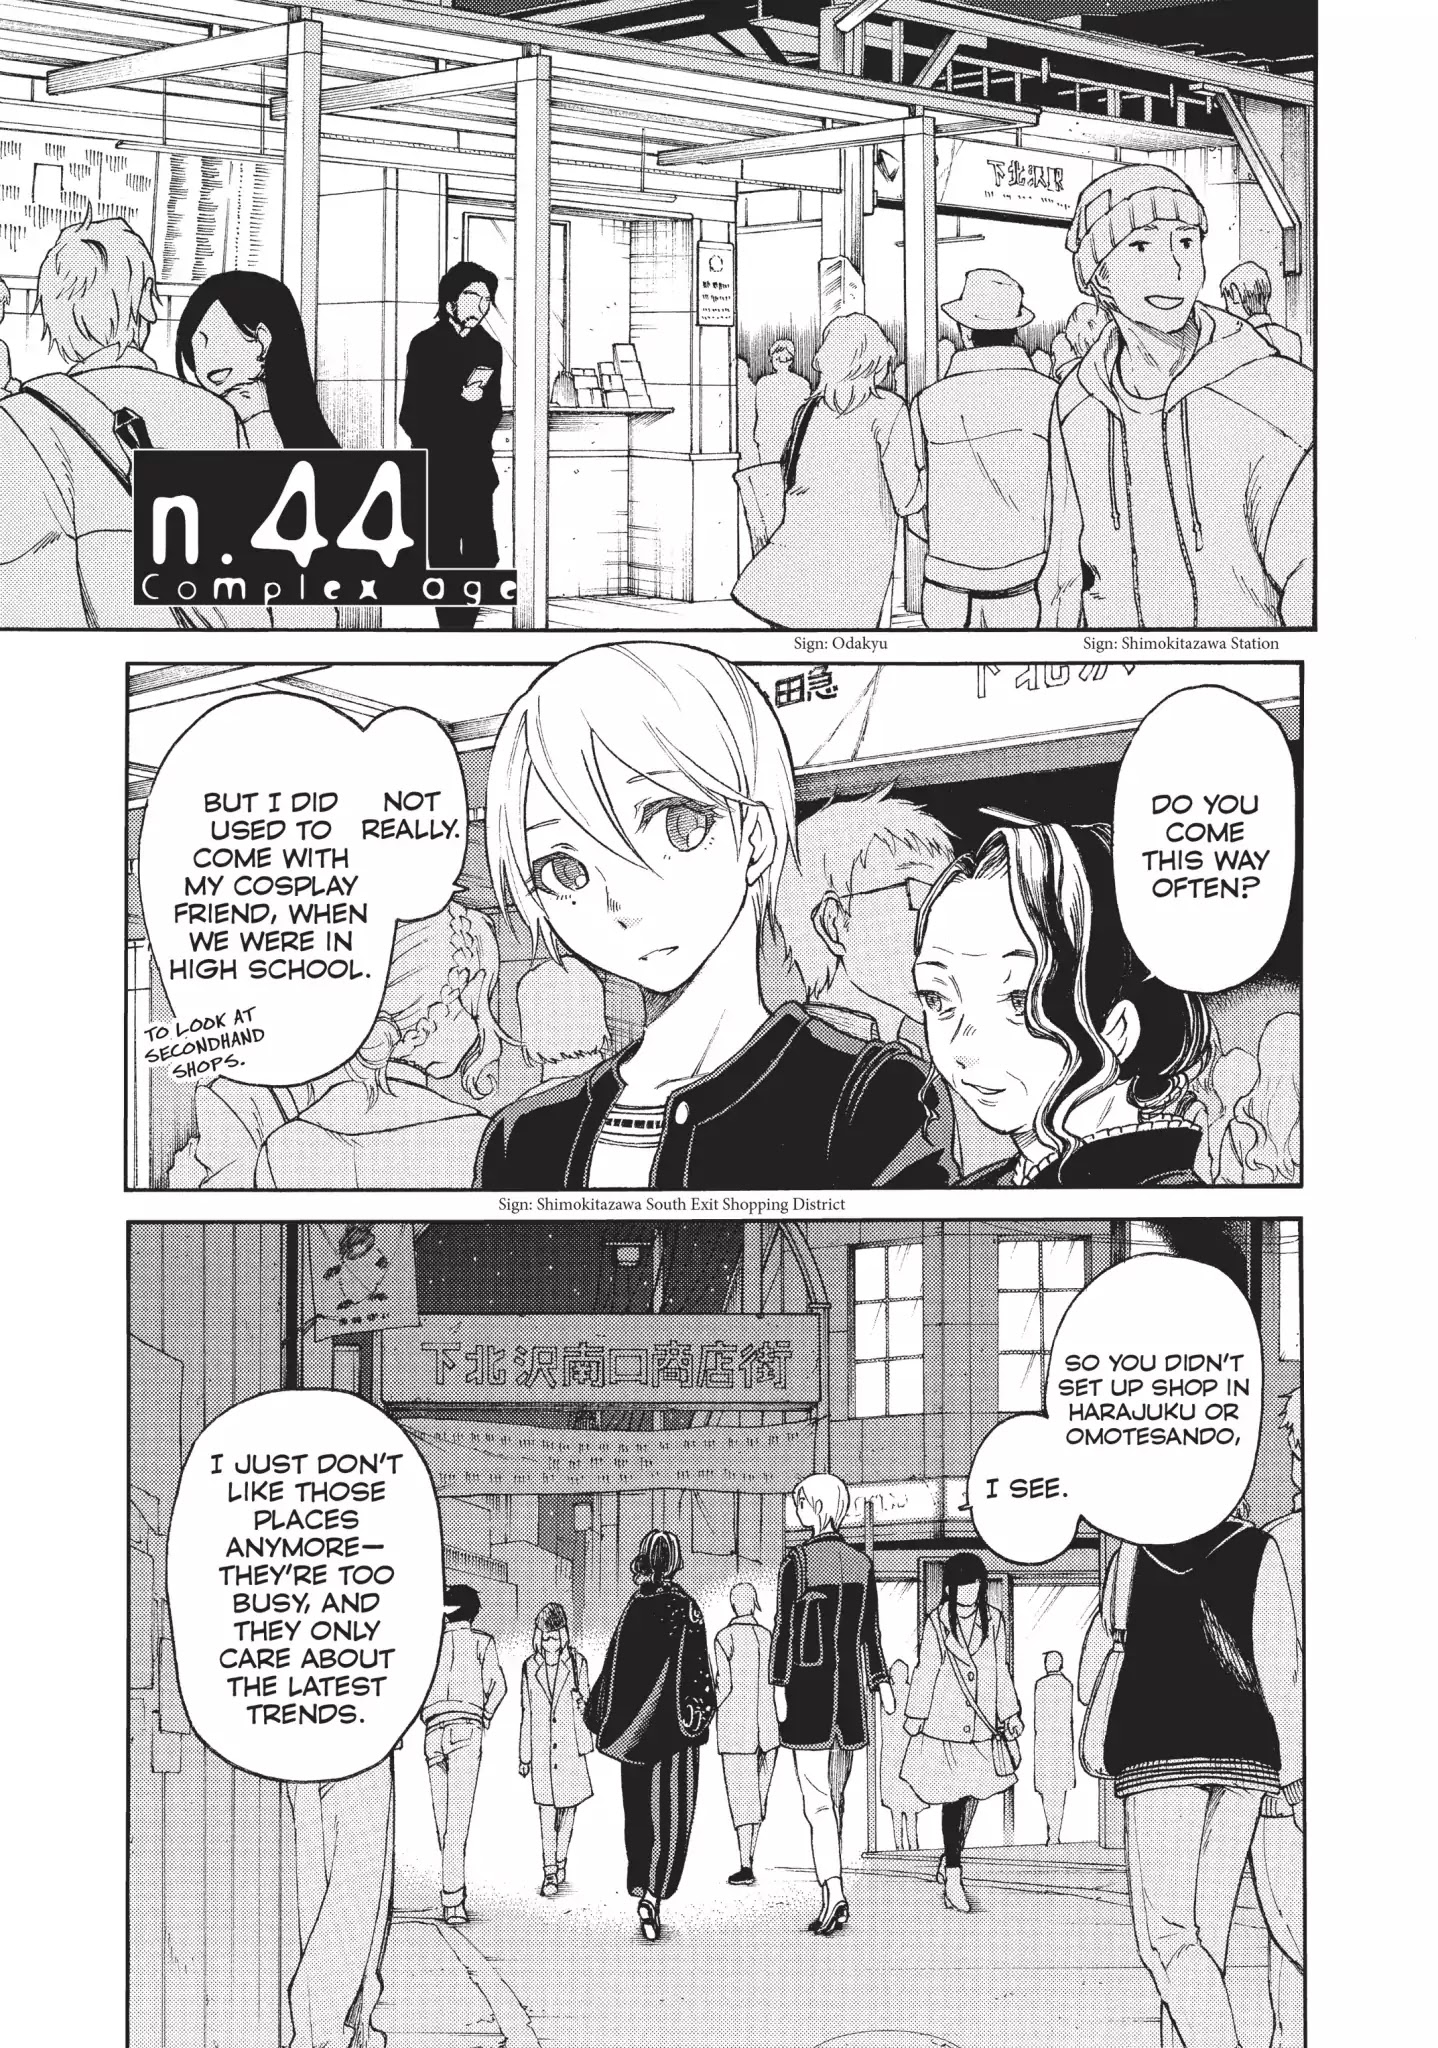 Complex Age Chapter 44 #1